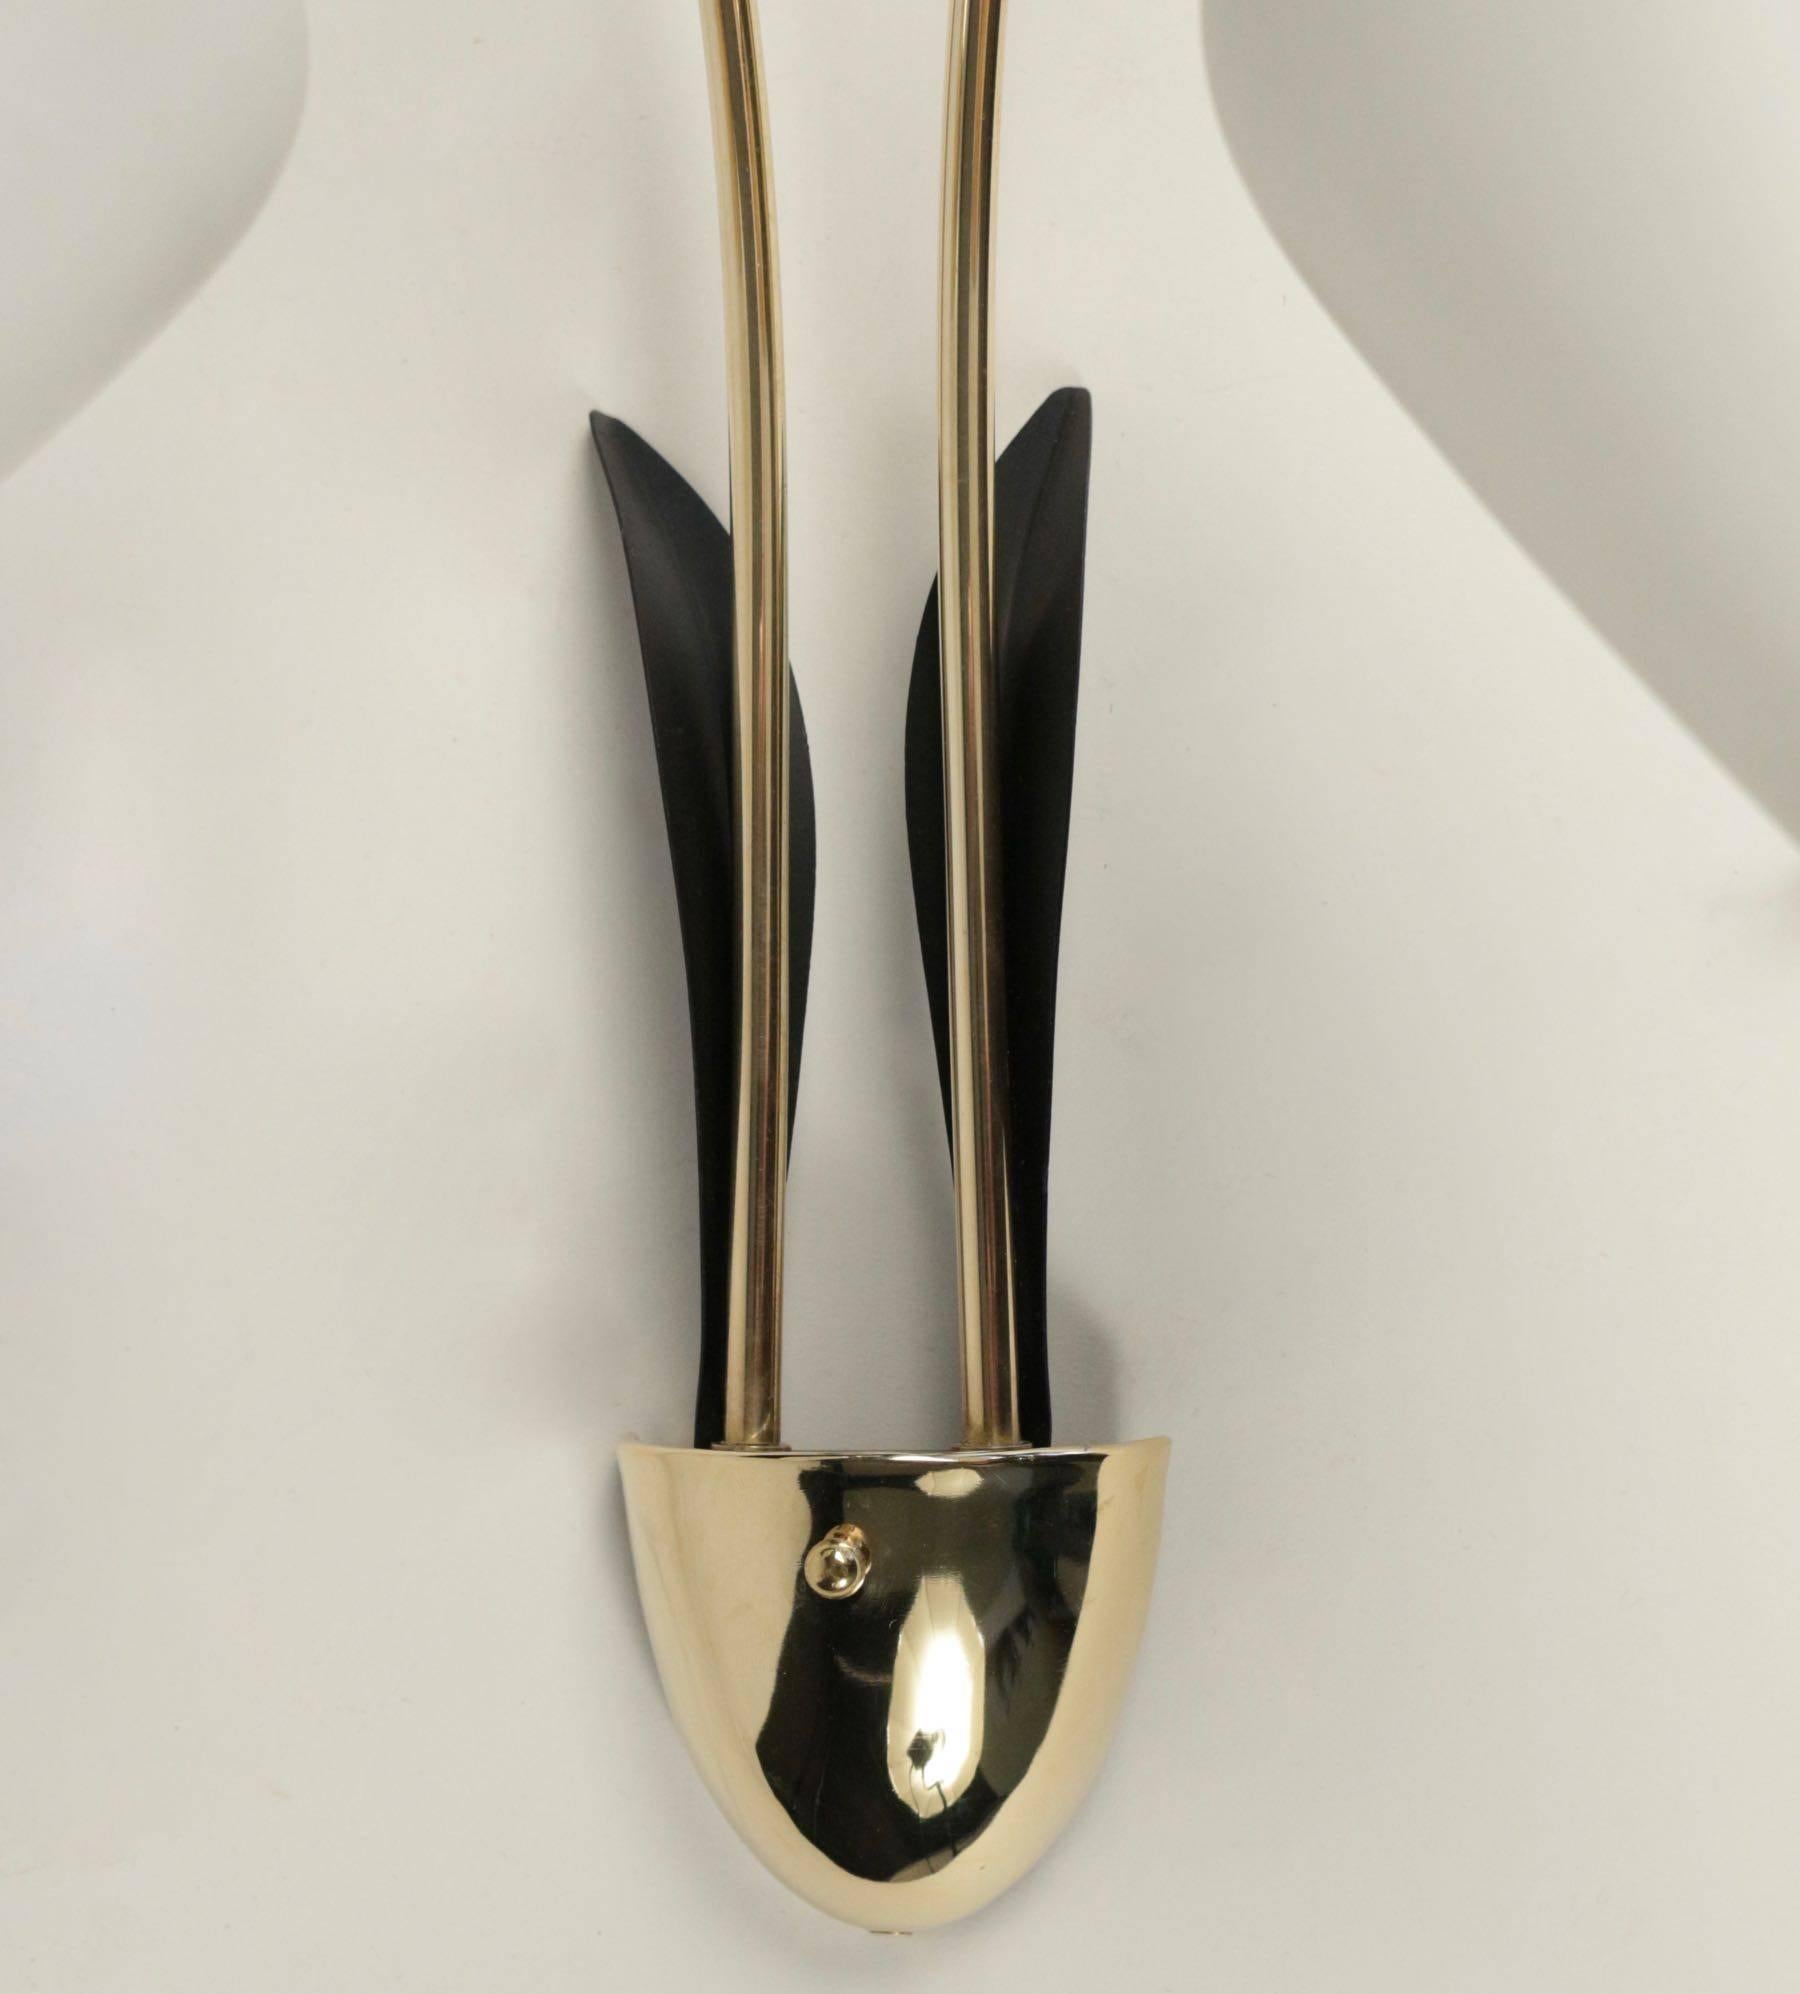 Pair of sconces, flower buds by Maison Lunel, 1950.

Each sconces is composed by two curved brass stem ended by two opaline glass lampshades in shape of flower buds. Two black lacquered leaves.
Two bulbs per sconce.